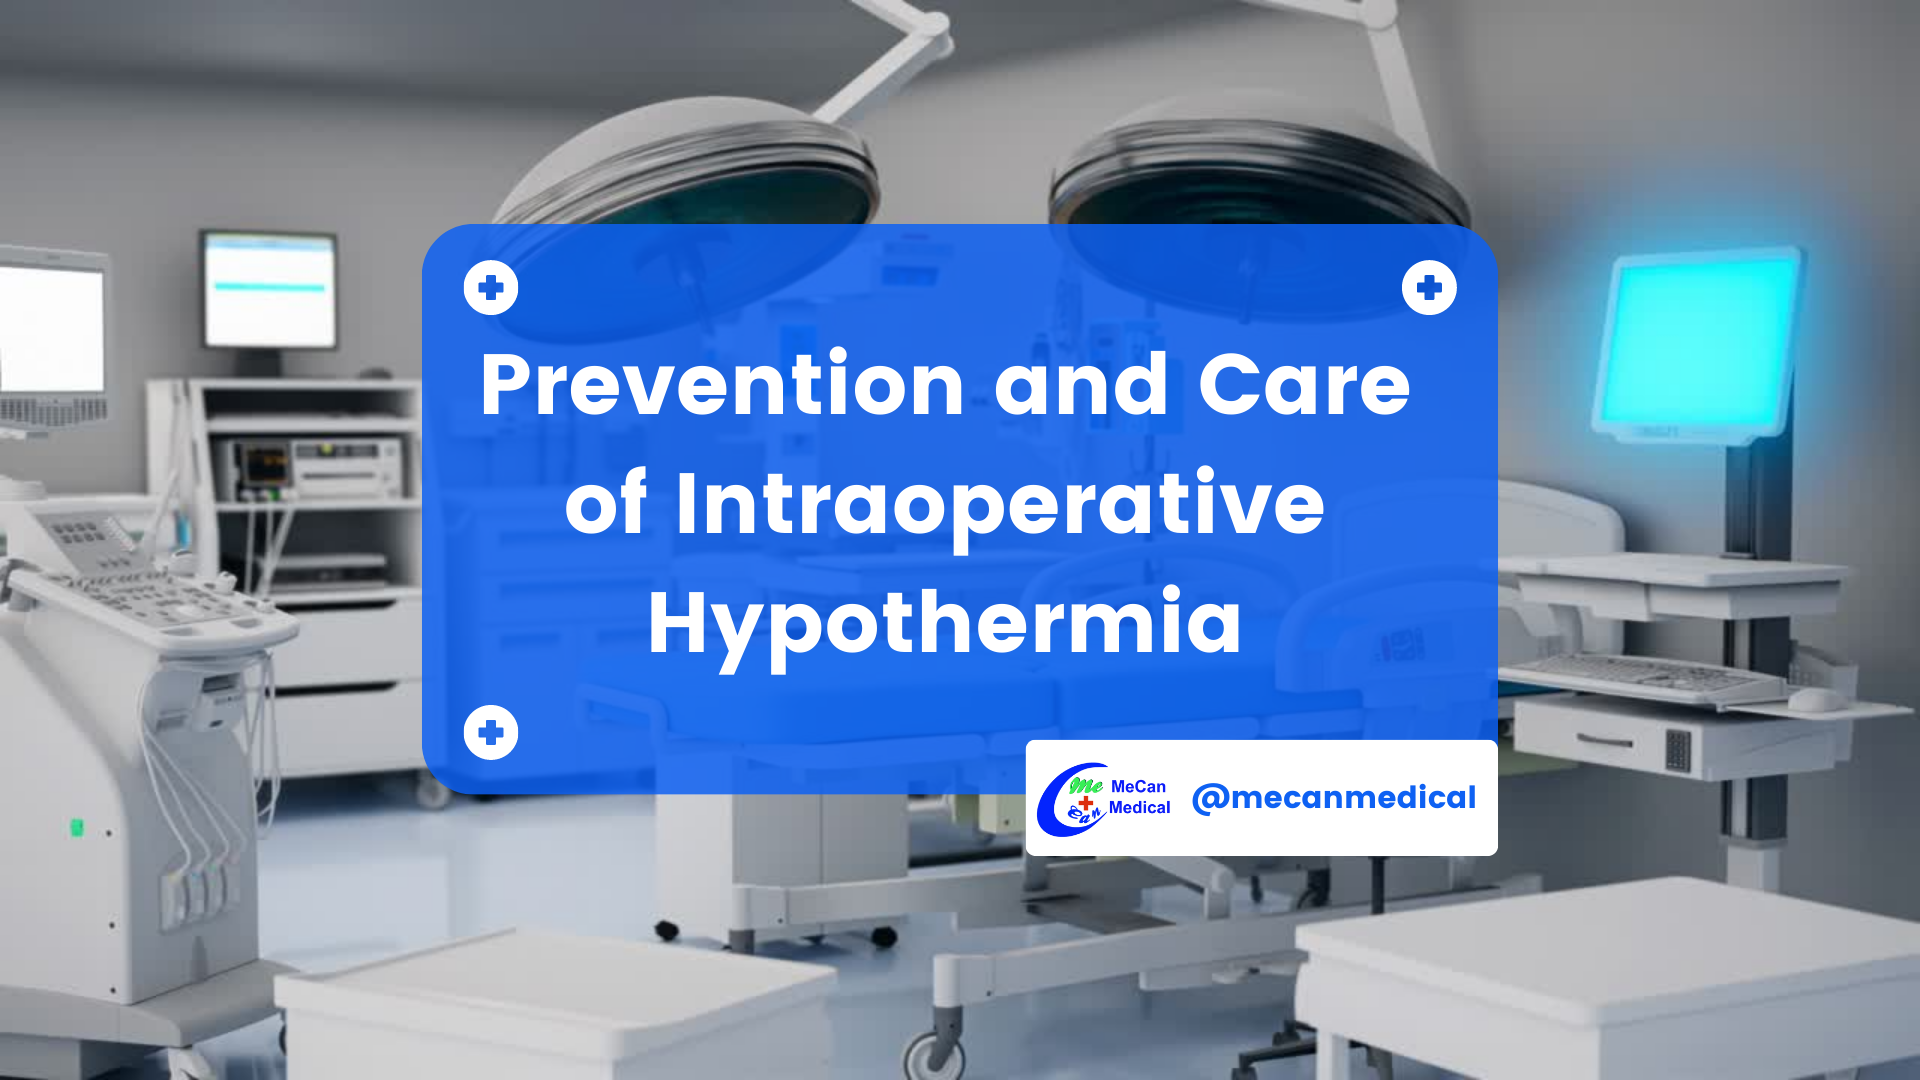 Prevention and Care of Intraoperative Hypothermia - Part 1